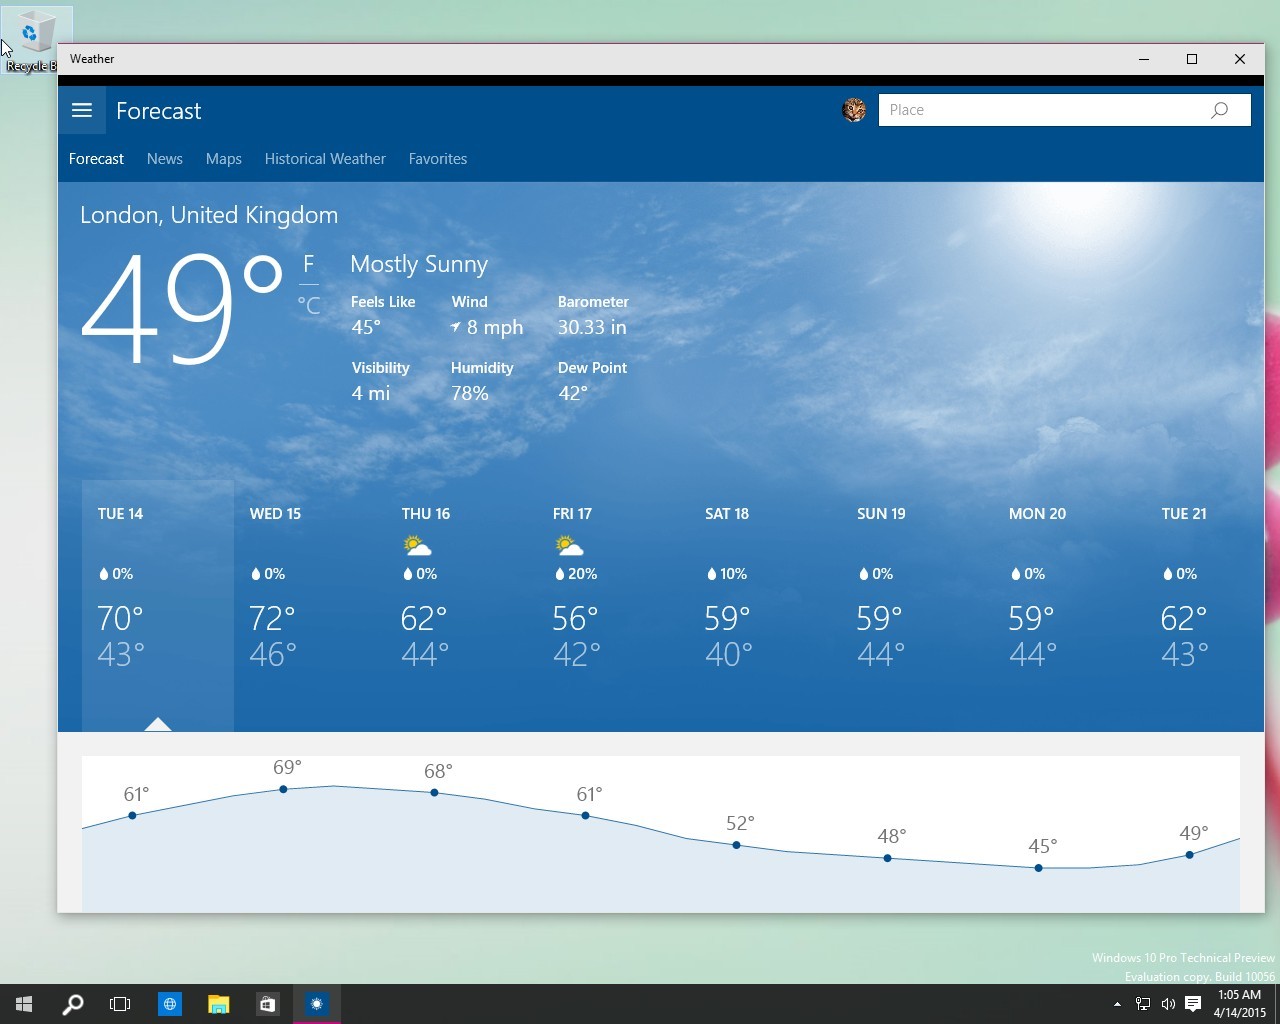 Microsoft Releases New Weather App for Windows 10 with Hamburger Button